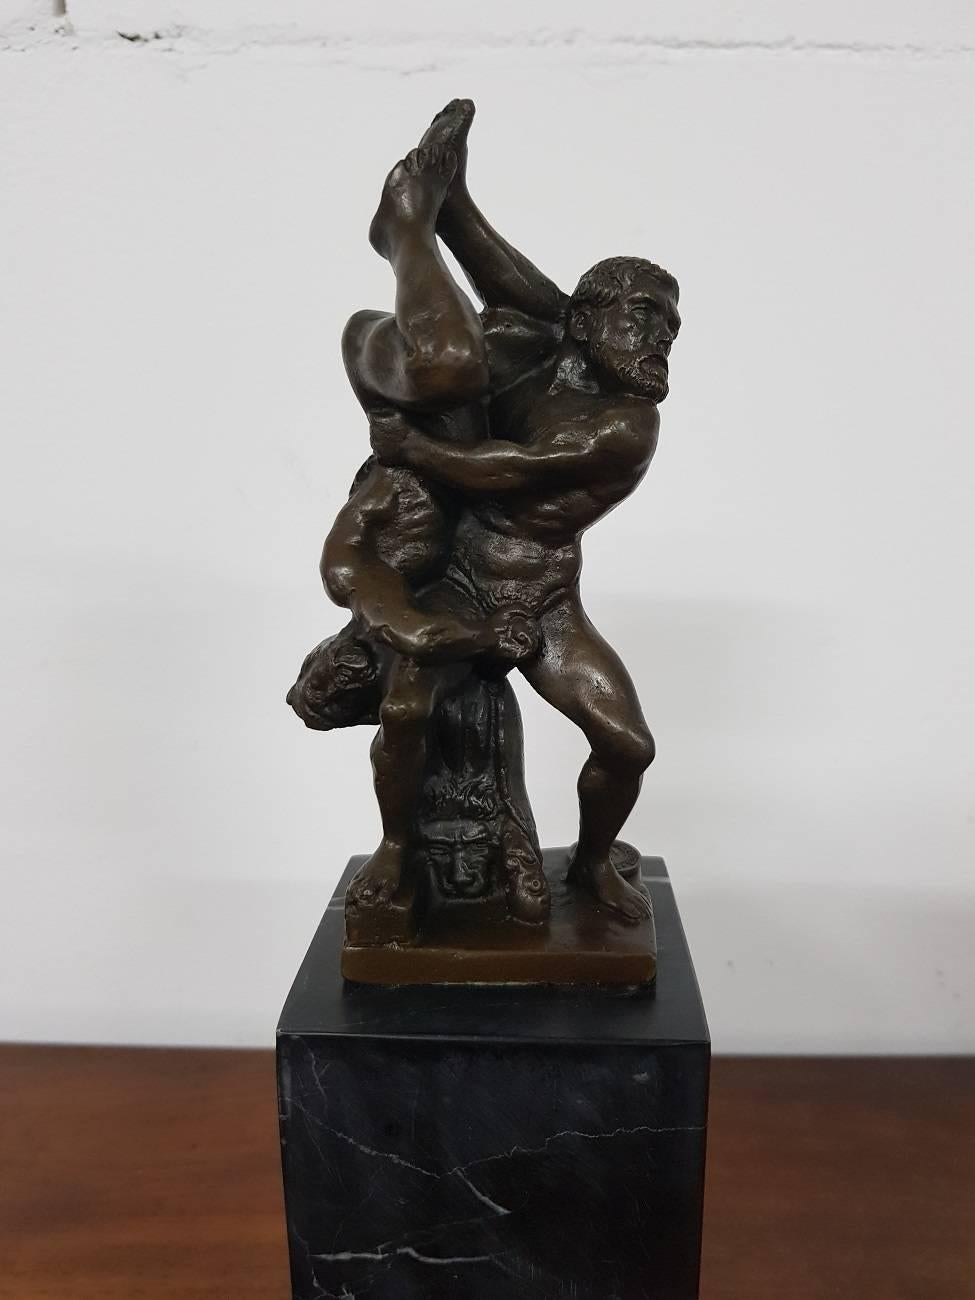 French bronze sculpture on black marble base depicting Hercules and Diomedes after the marble statue of Vincenzo de Rossi, circa 1560. This one is from the second half of the 20th century and marked 